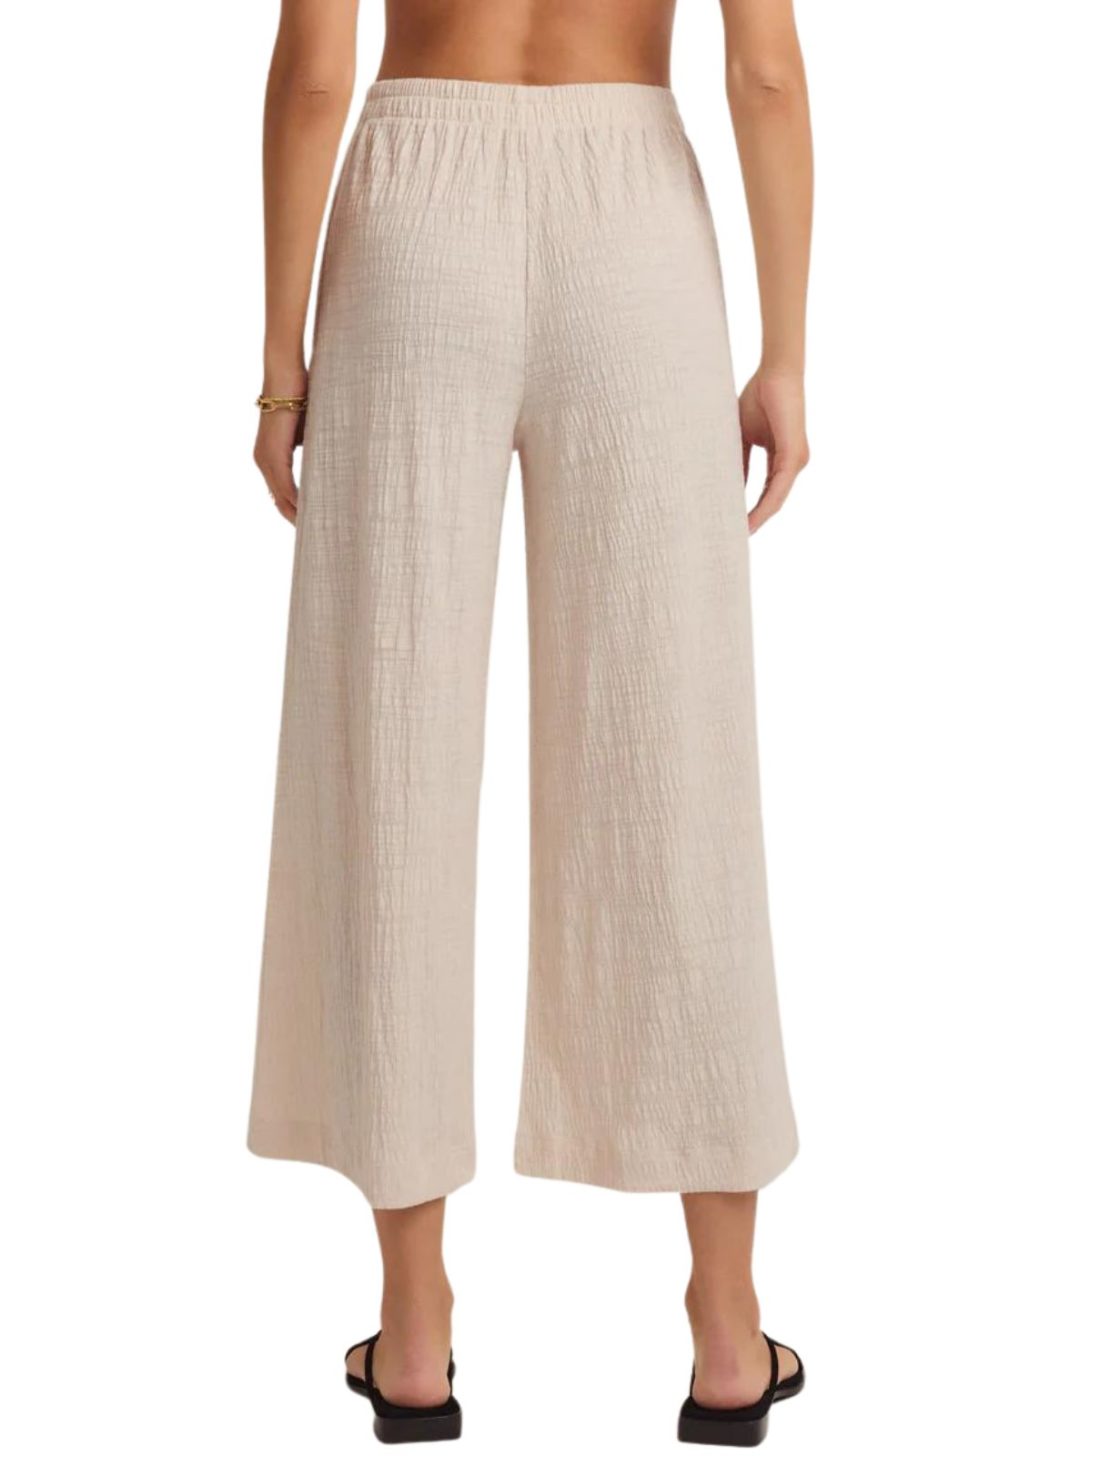 z supply scout textured pant in whisper white